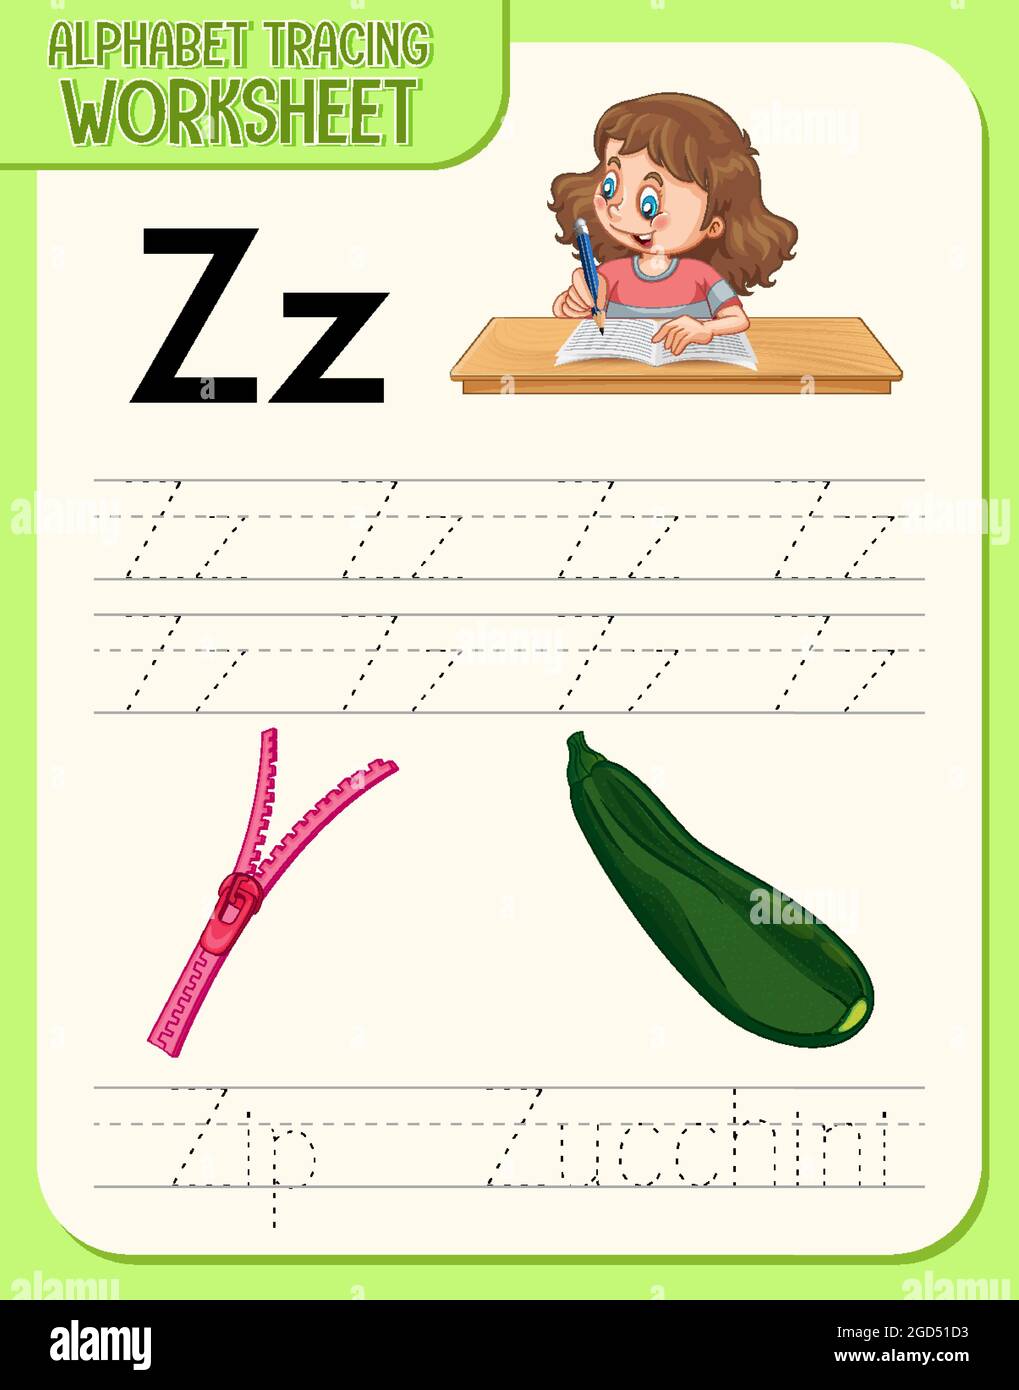 Alphabet tracing worksheet with letter Z and z illustration Stock Vector